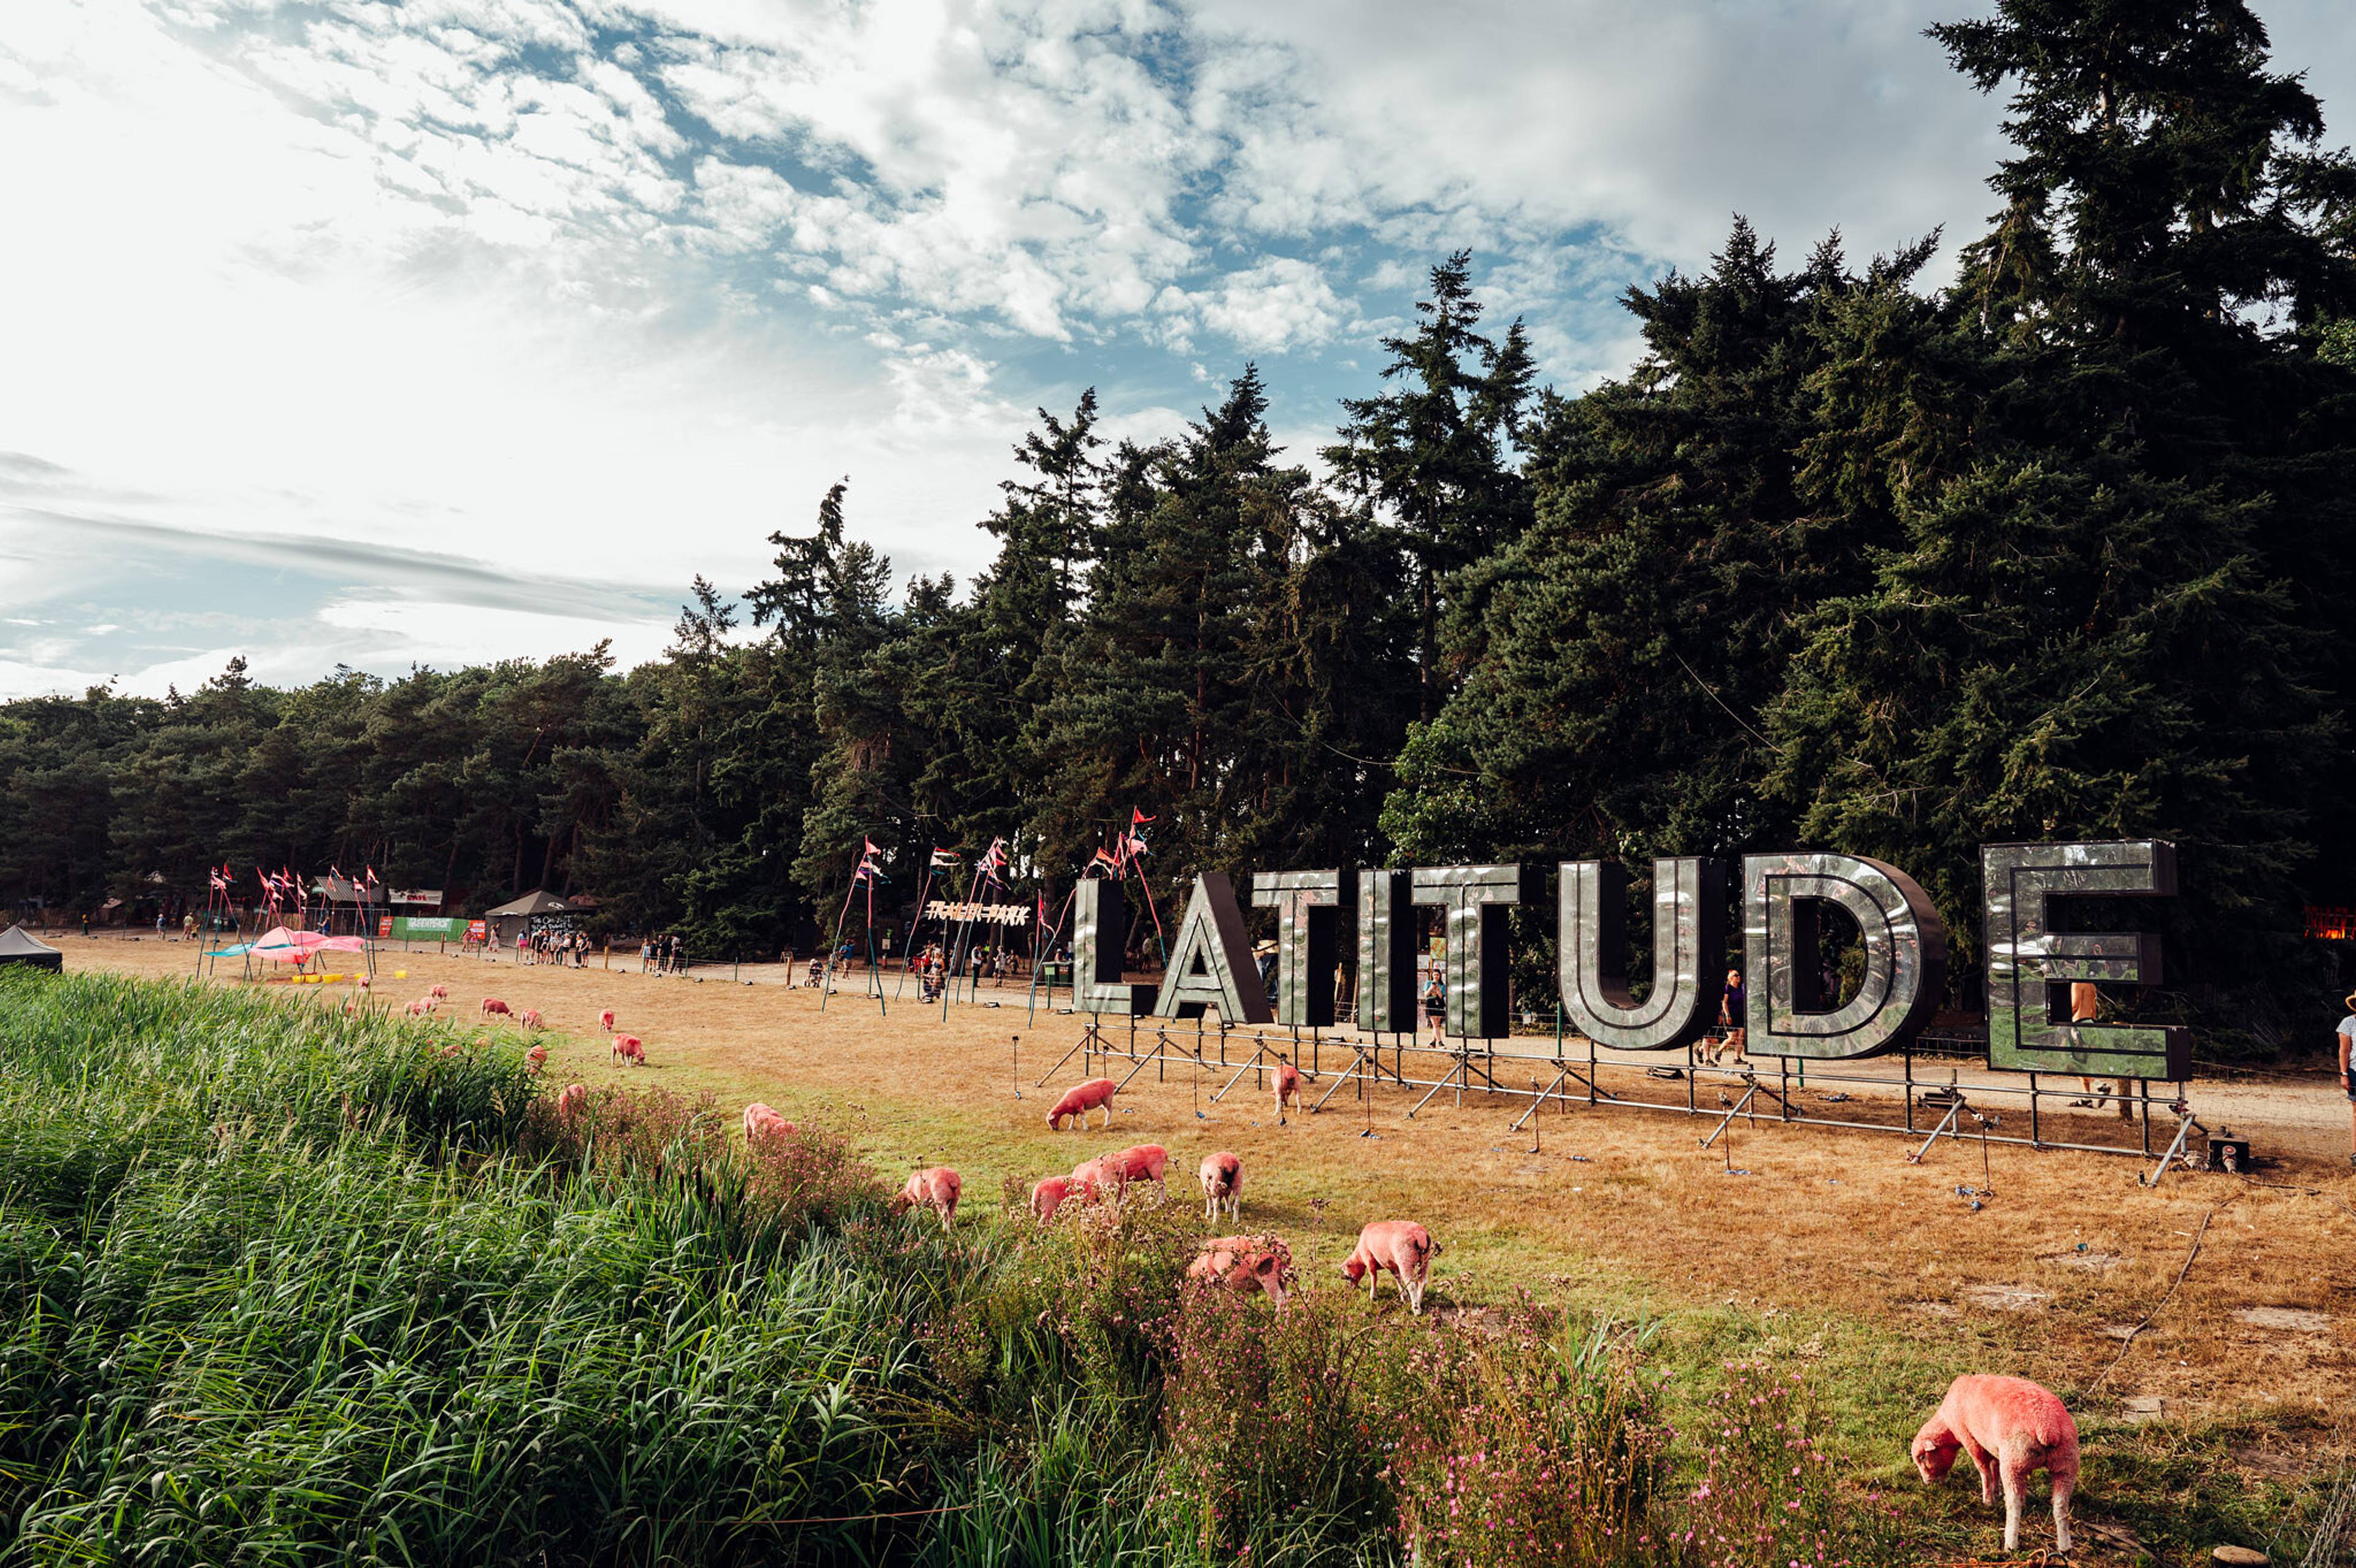 'Latitude' festival sign in a field with sheep